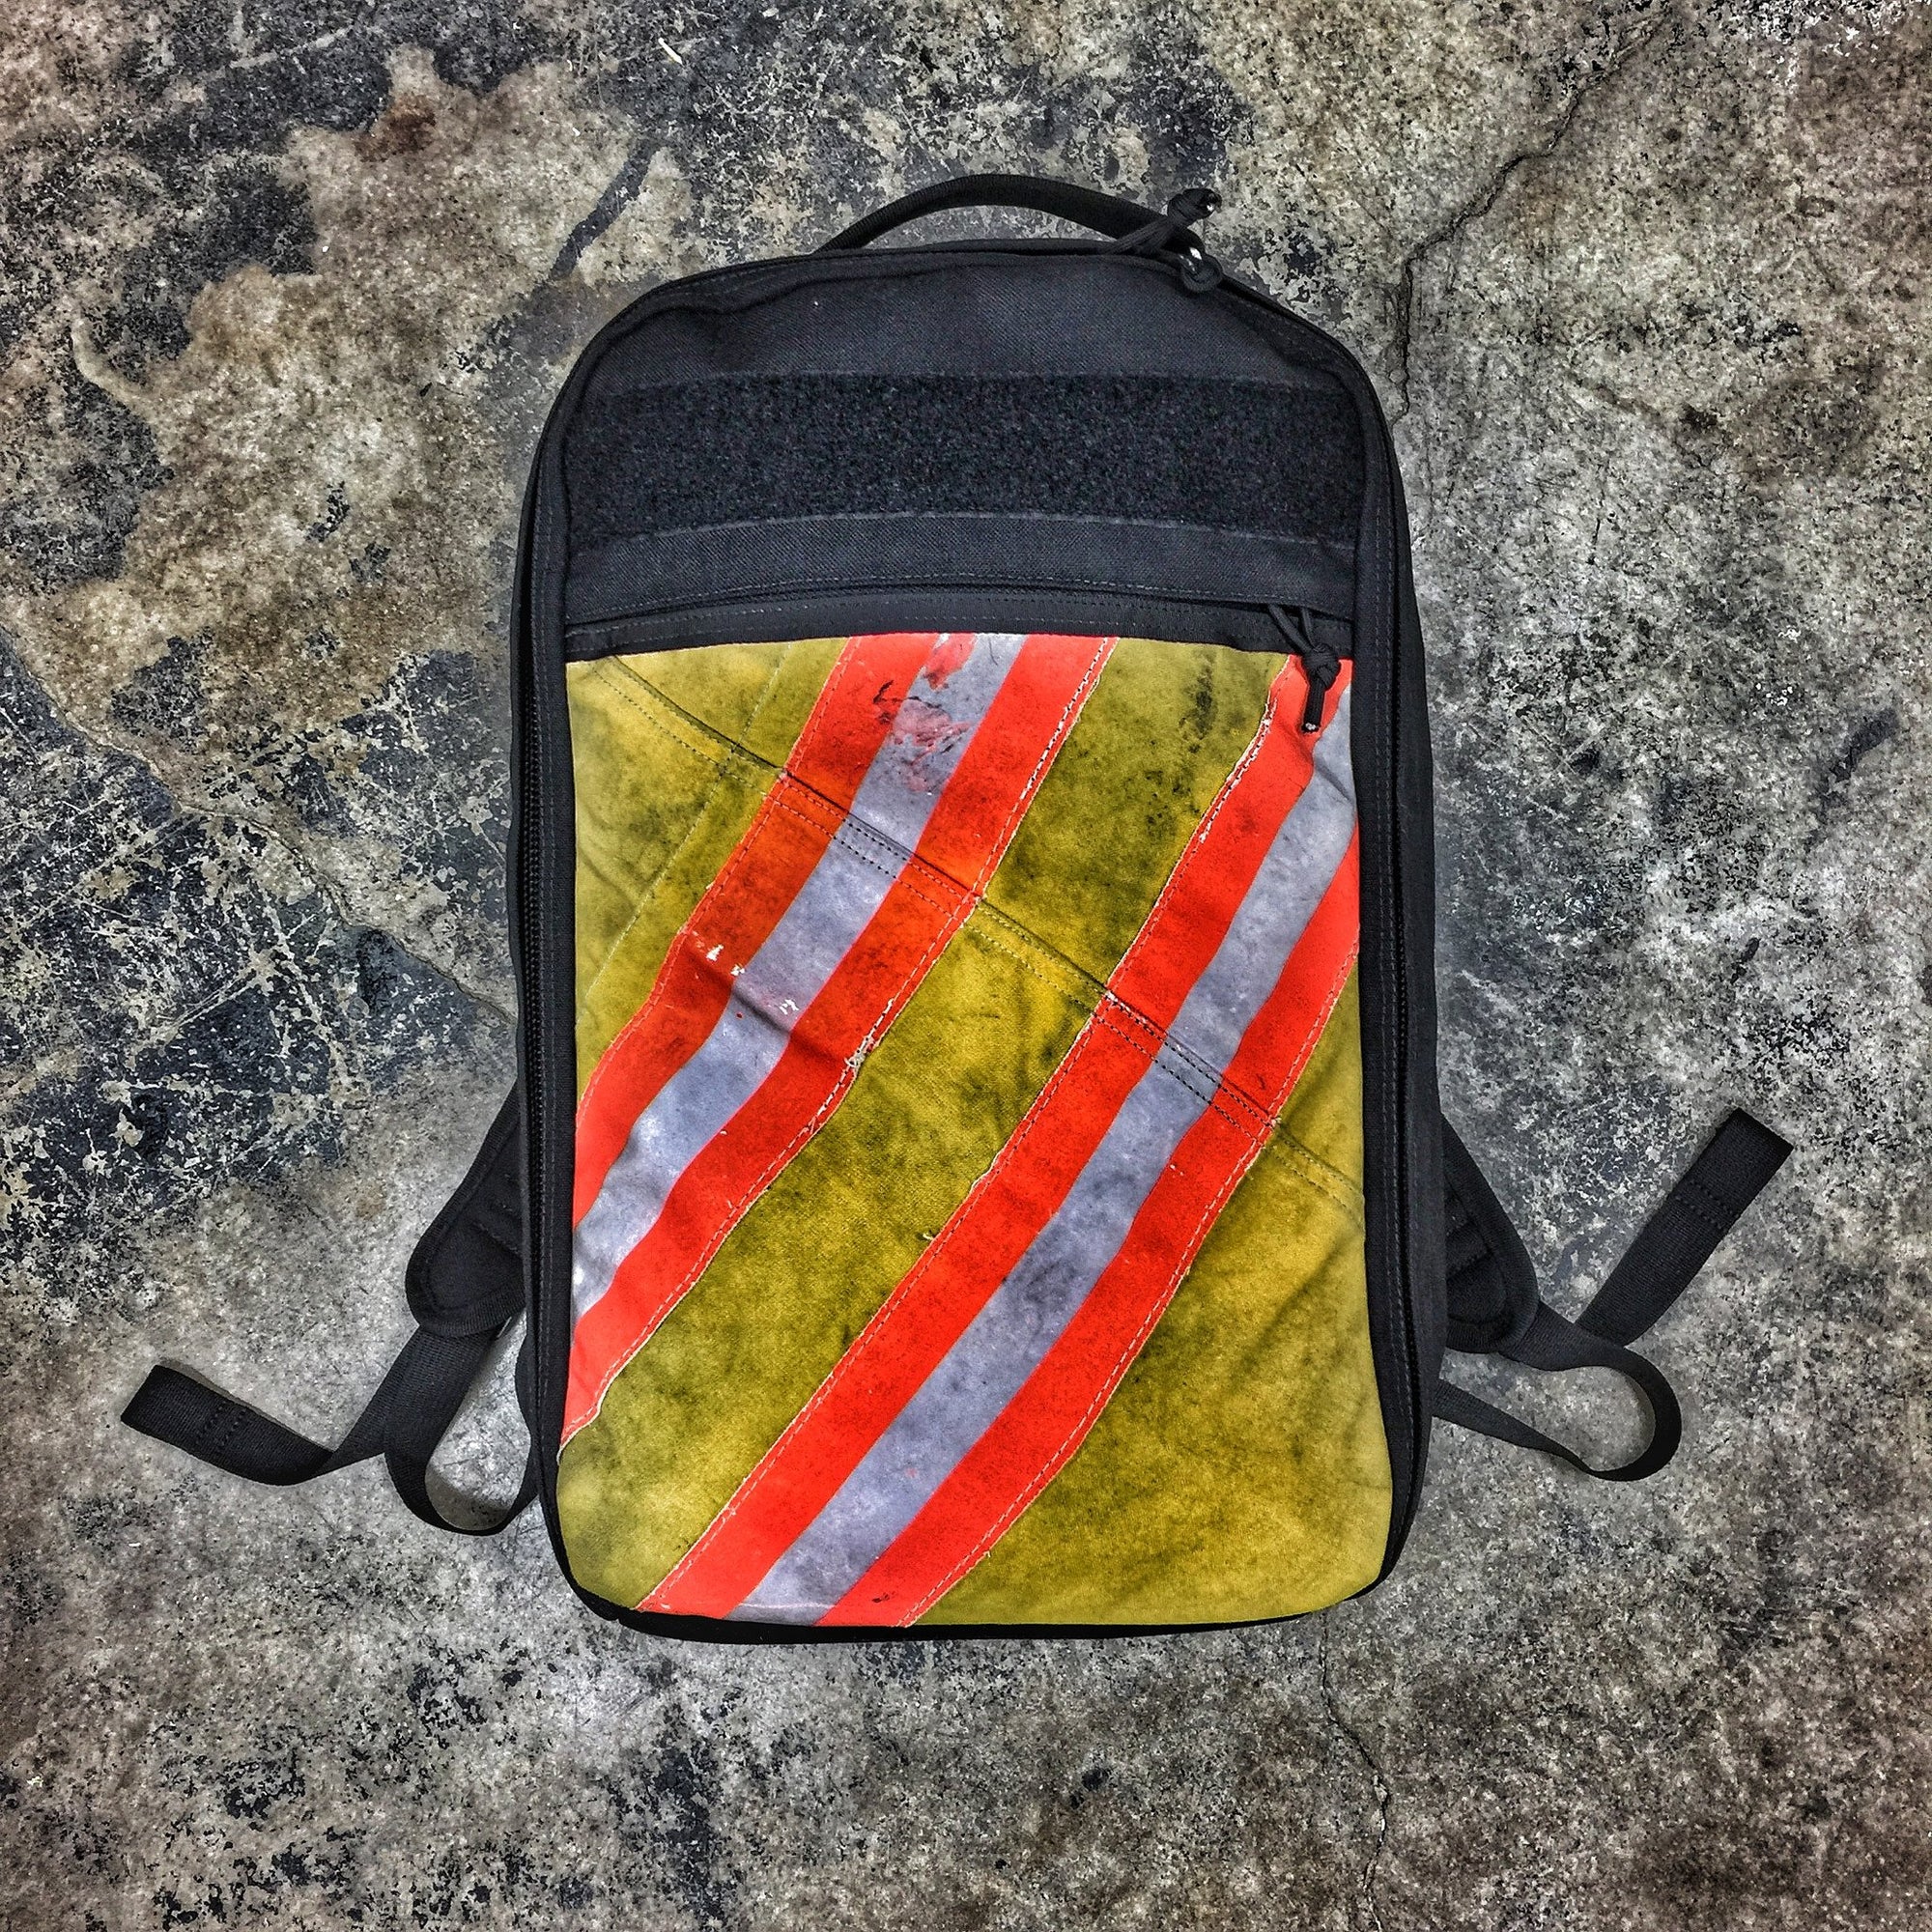 DELTA BACKPACK, Made in USA